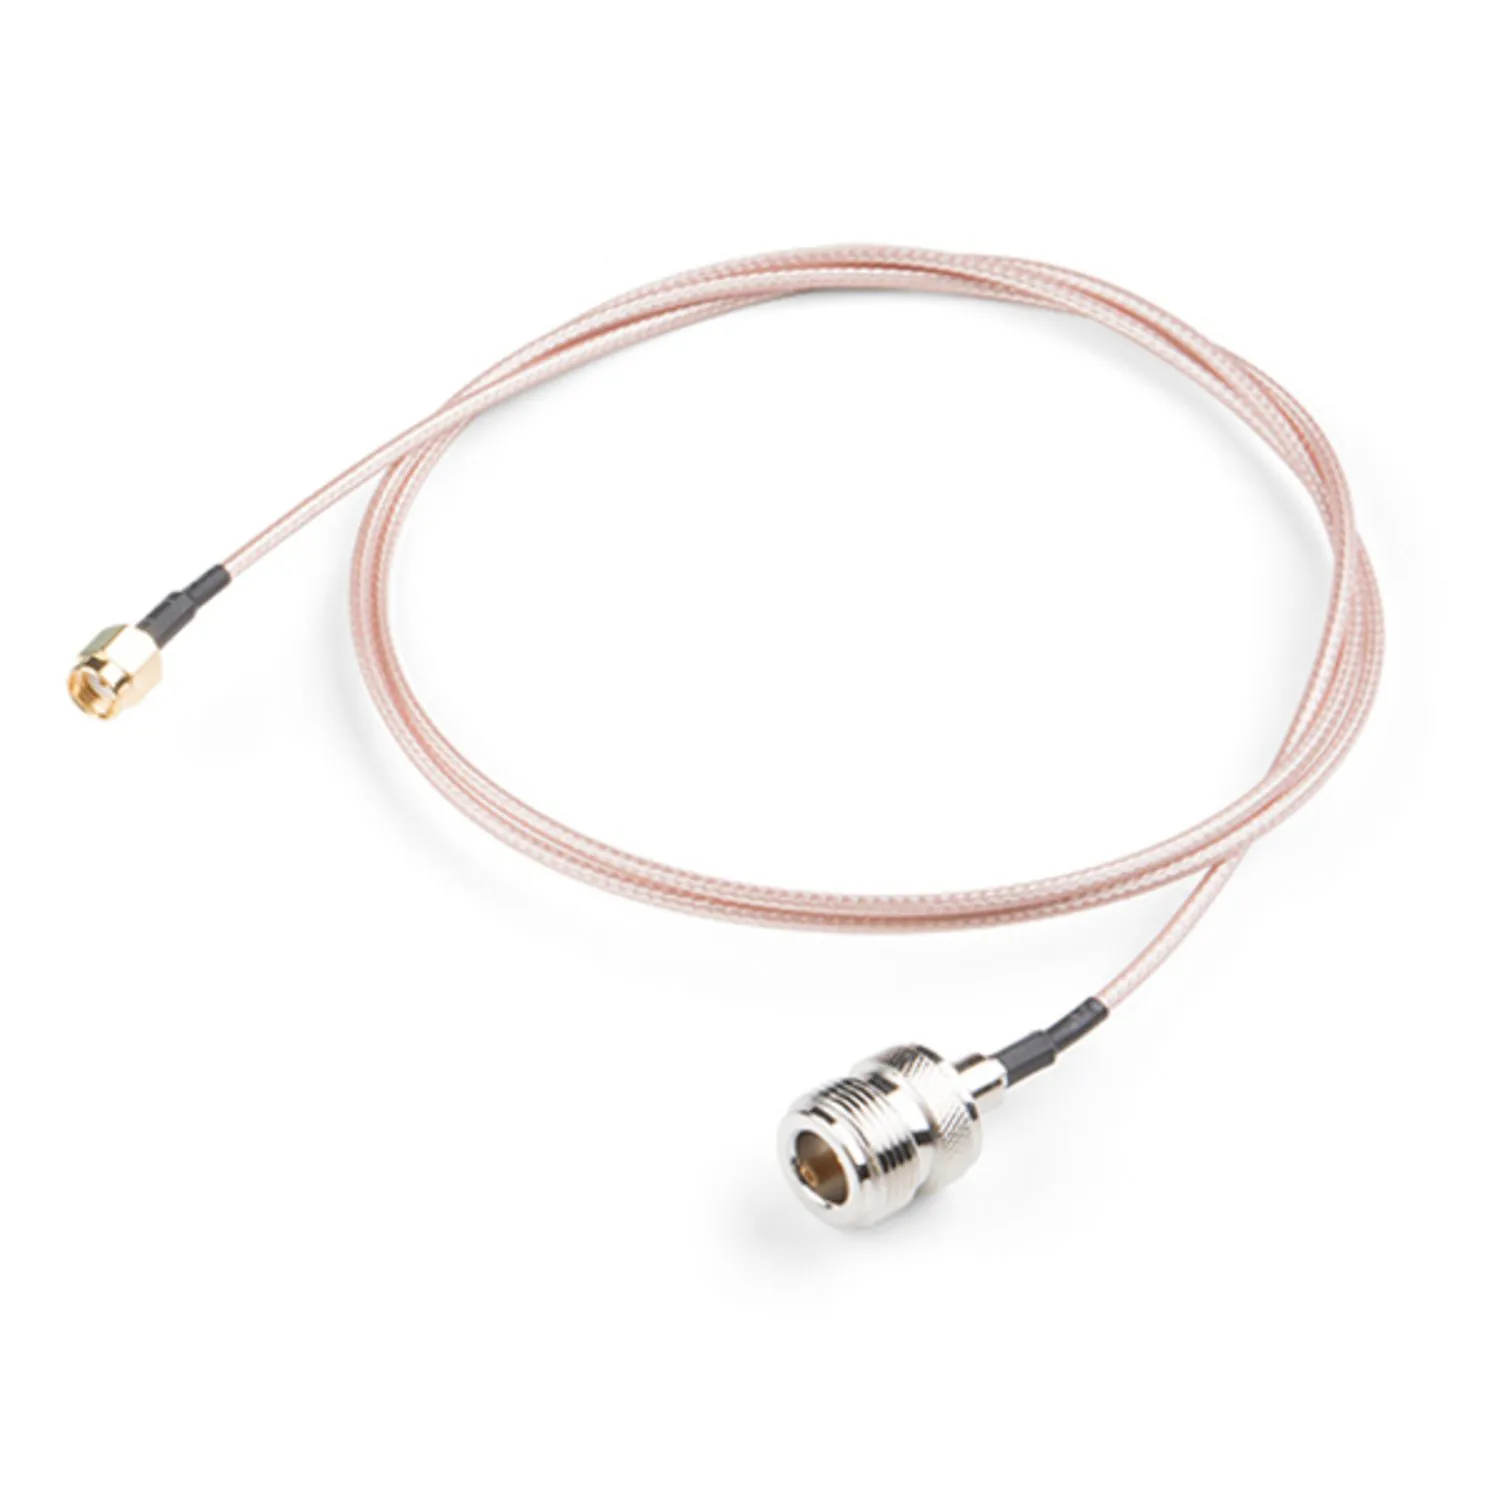 Photo of Interface Cable N to RP-SMA Cable - 1m